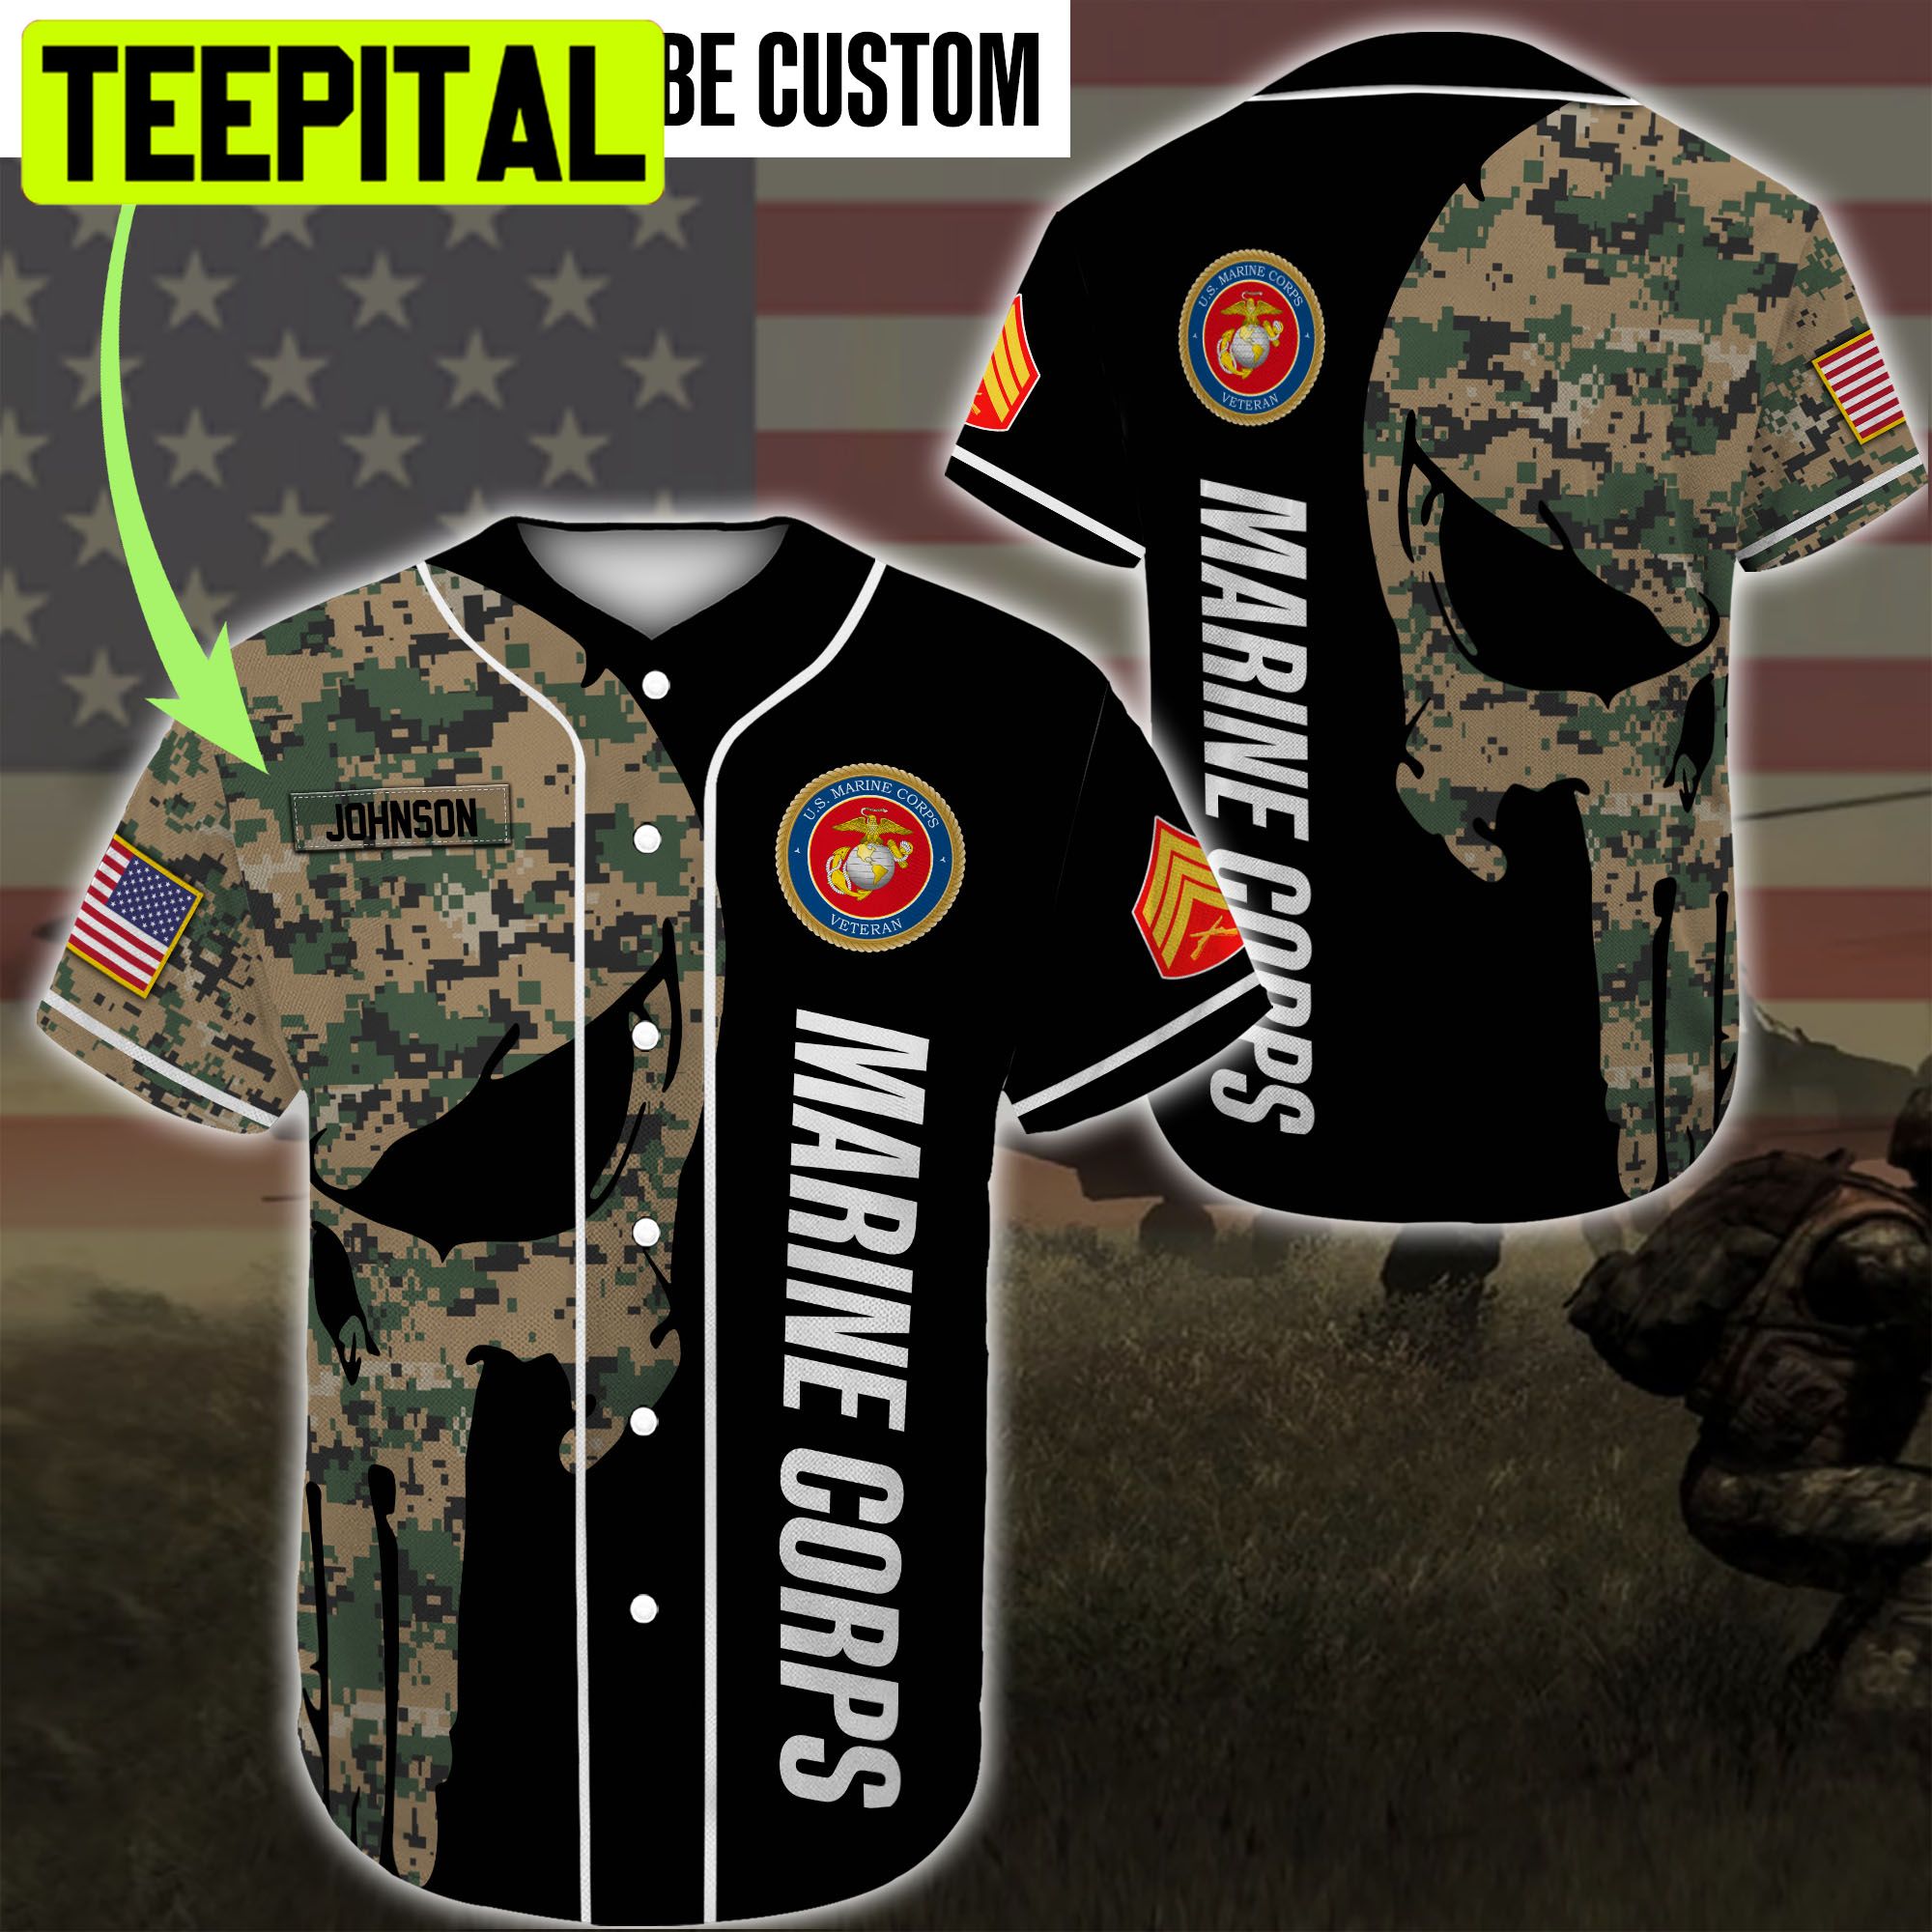 Top 10 Baseball Jersey Designs Cool With Meaning About Army US Veteran